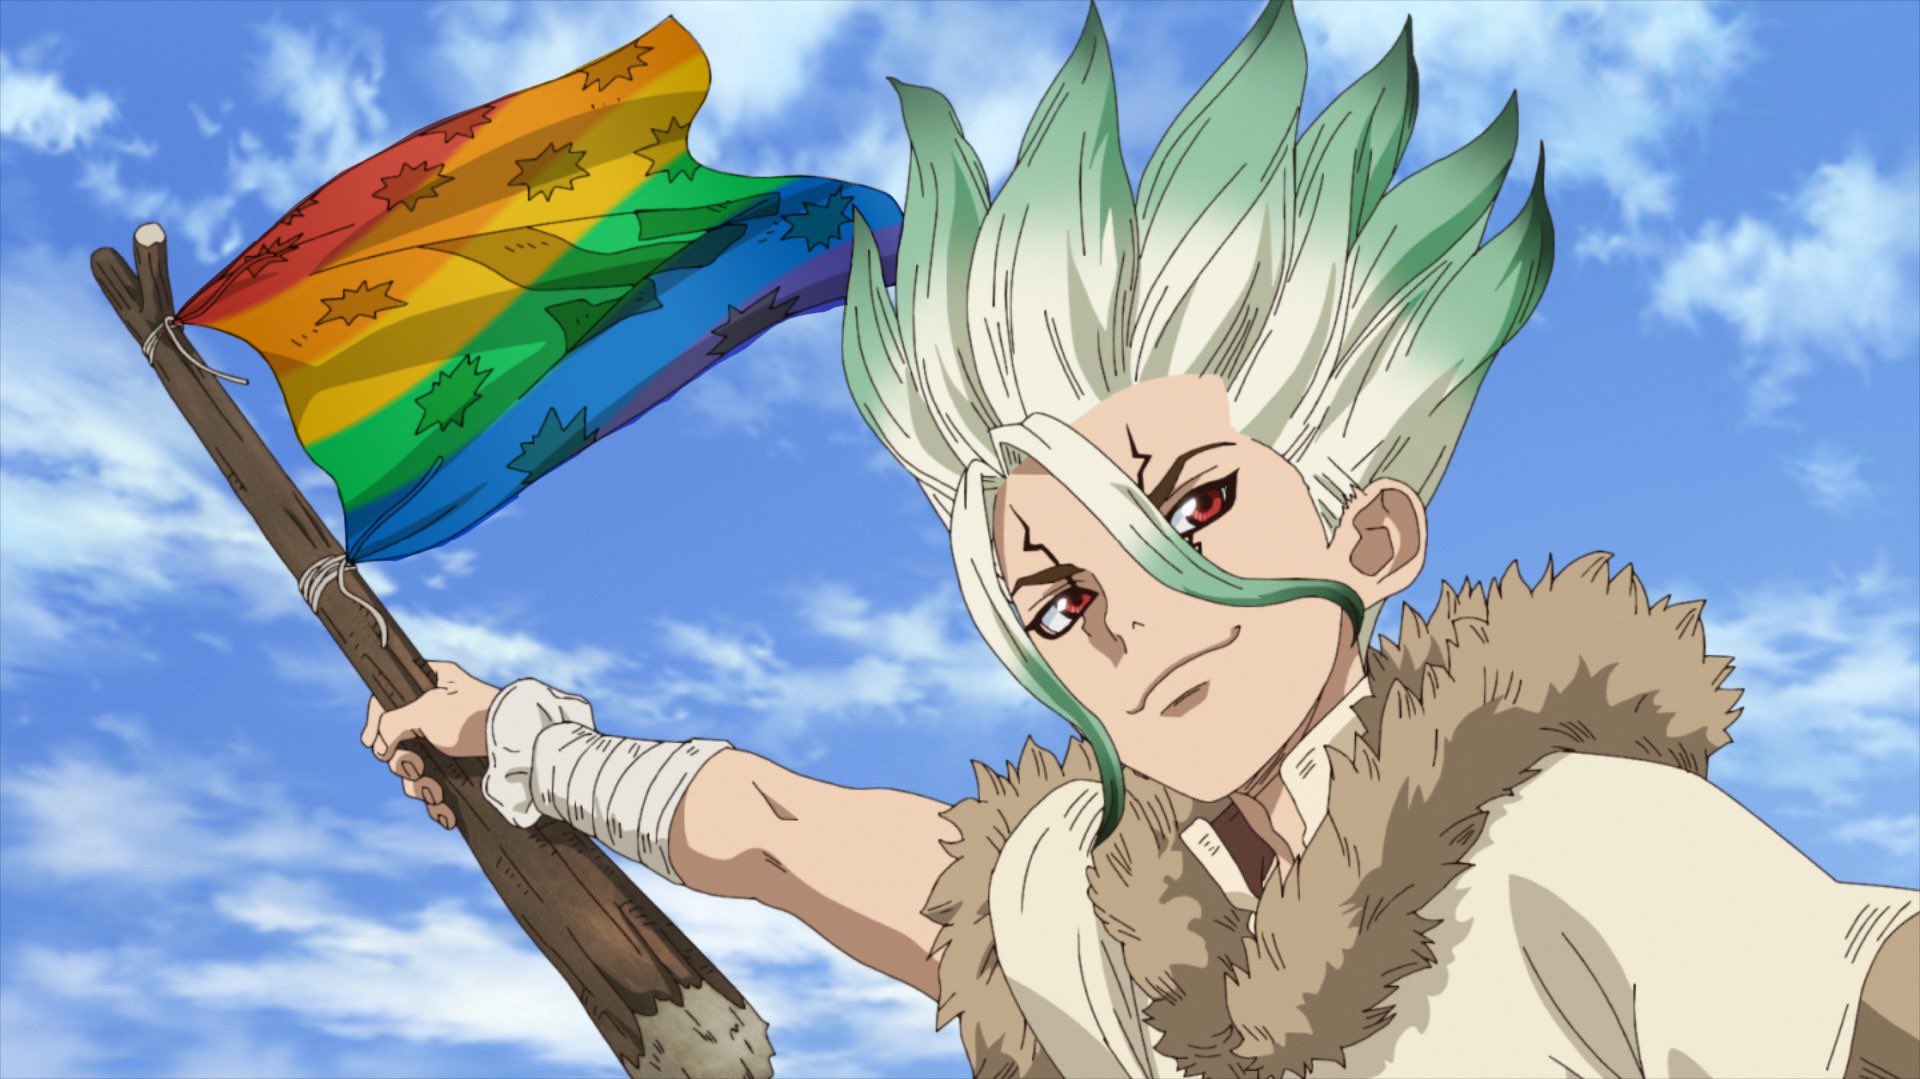 Dr. Stone Season 3 Part 2: Release date, time & where to watch - Dexerto